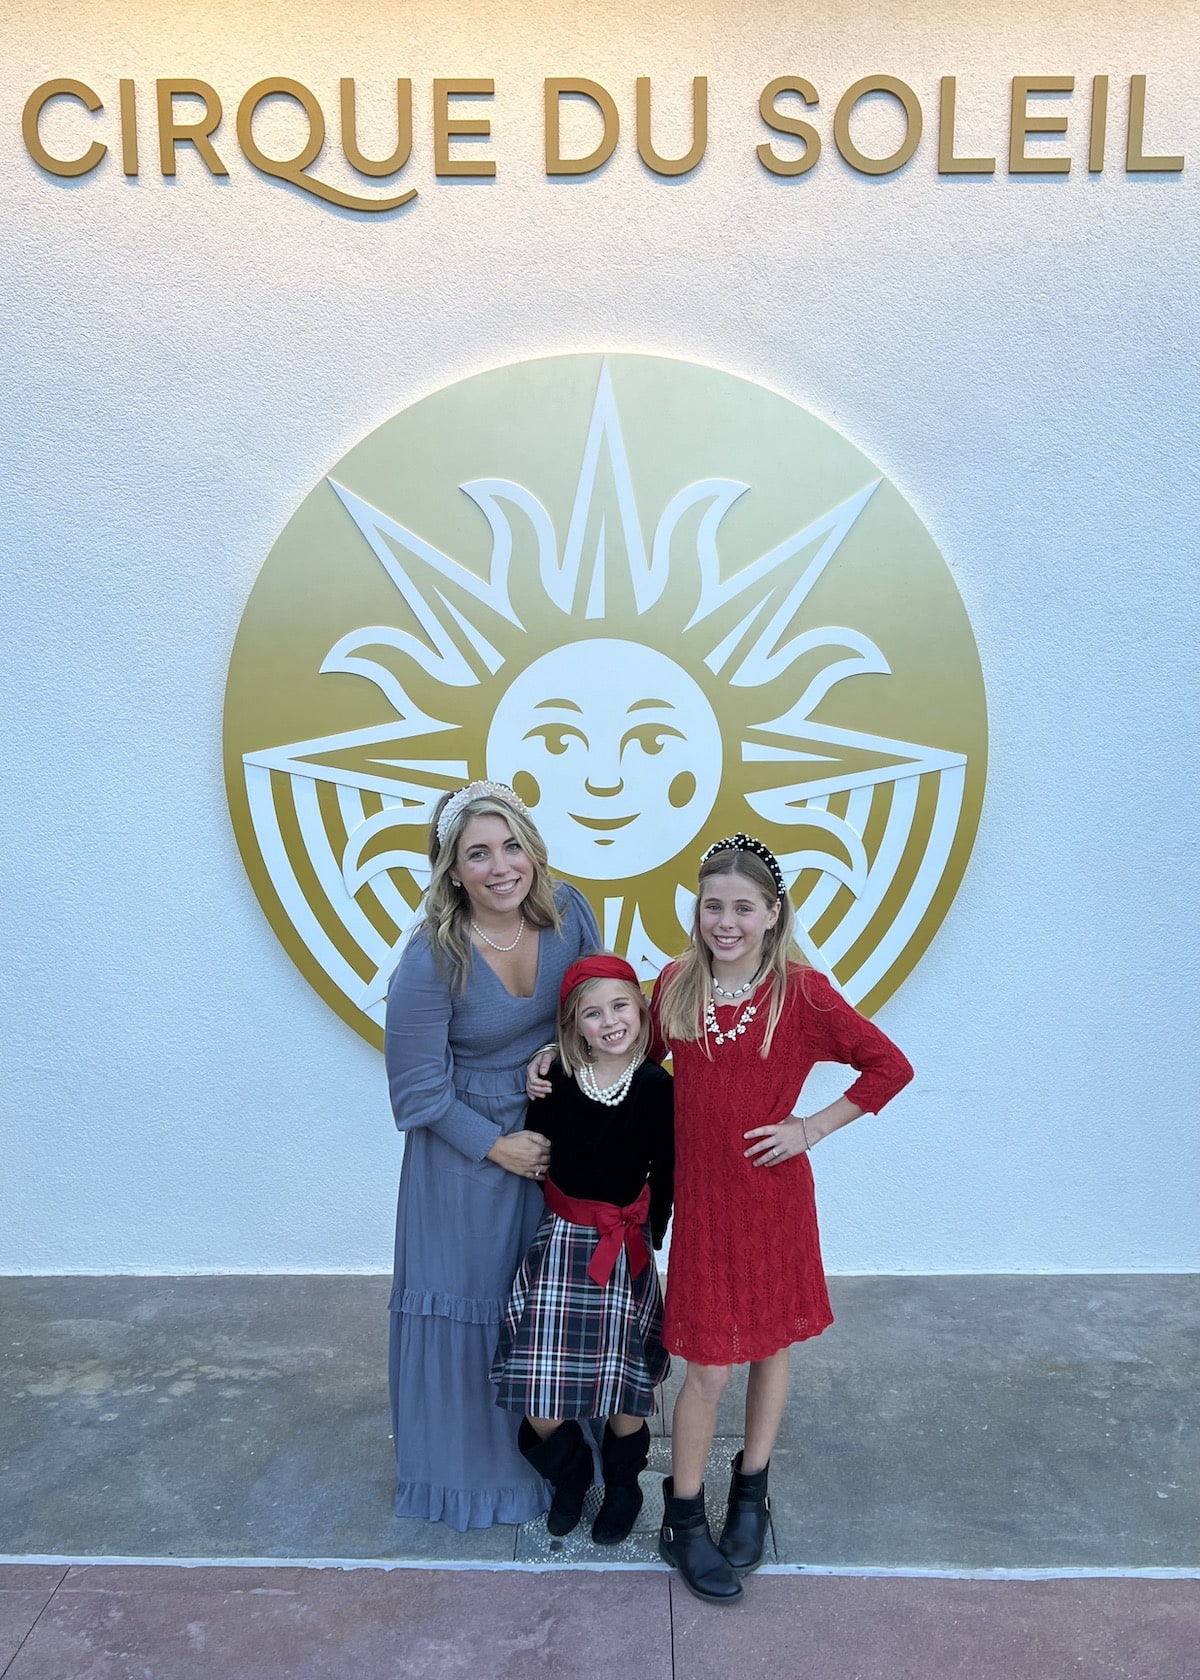 Cirque Du Soleil Disney Springs - What to Know Before You Go to Cirque Du Soleil Drawn to Life with Kids at Disney World